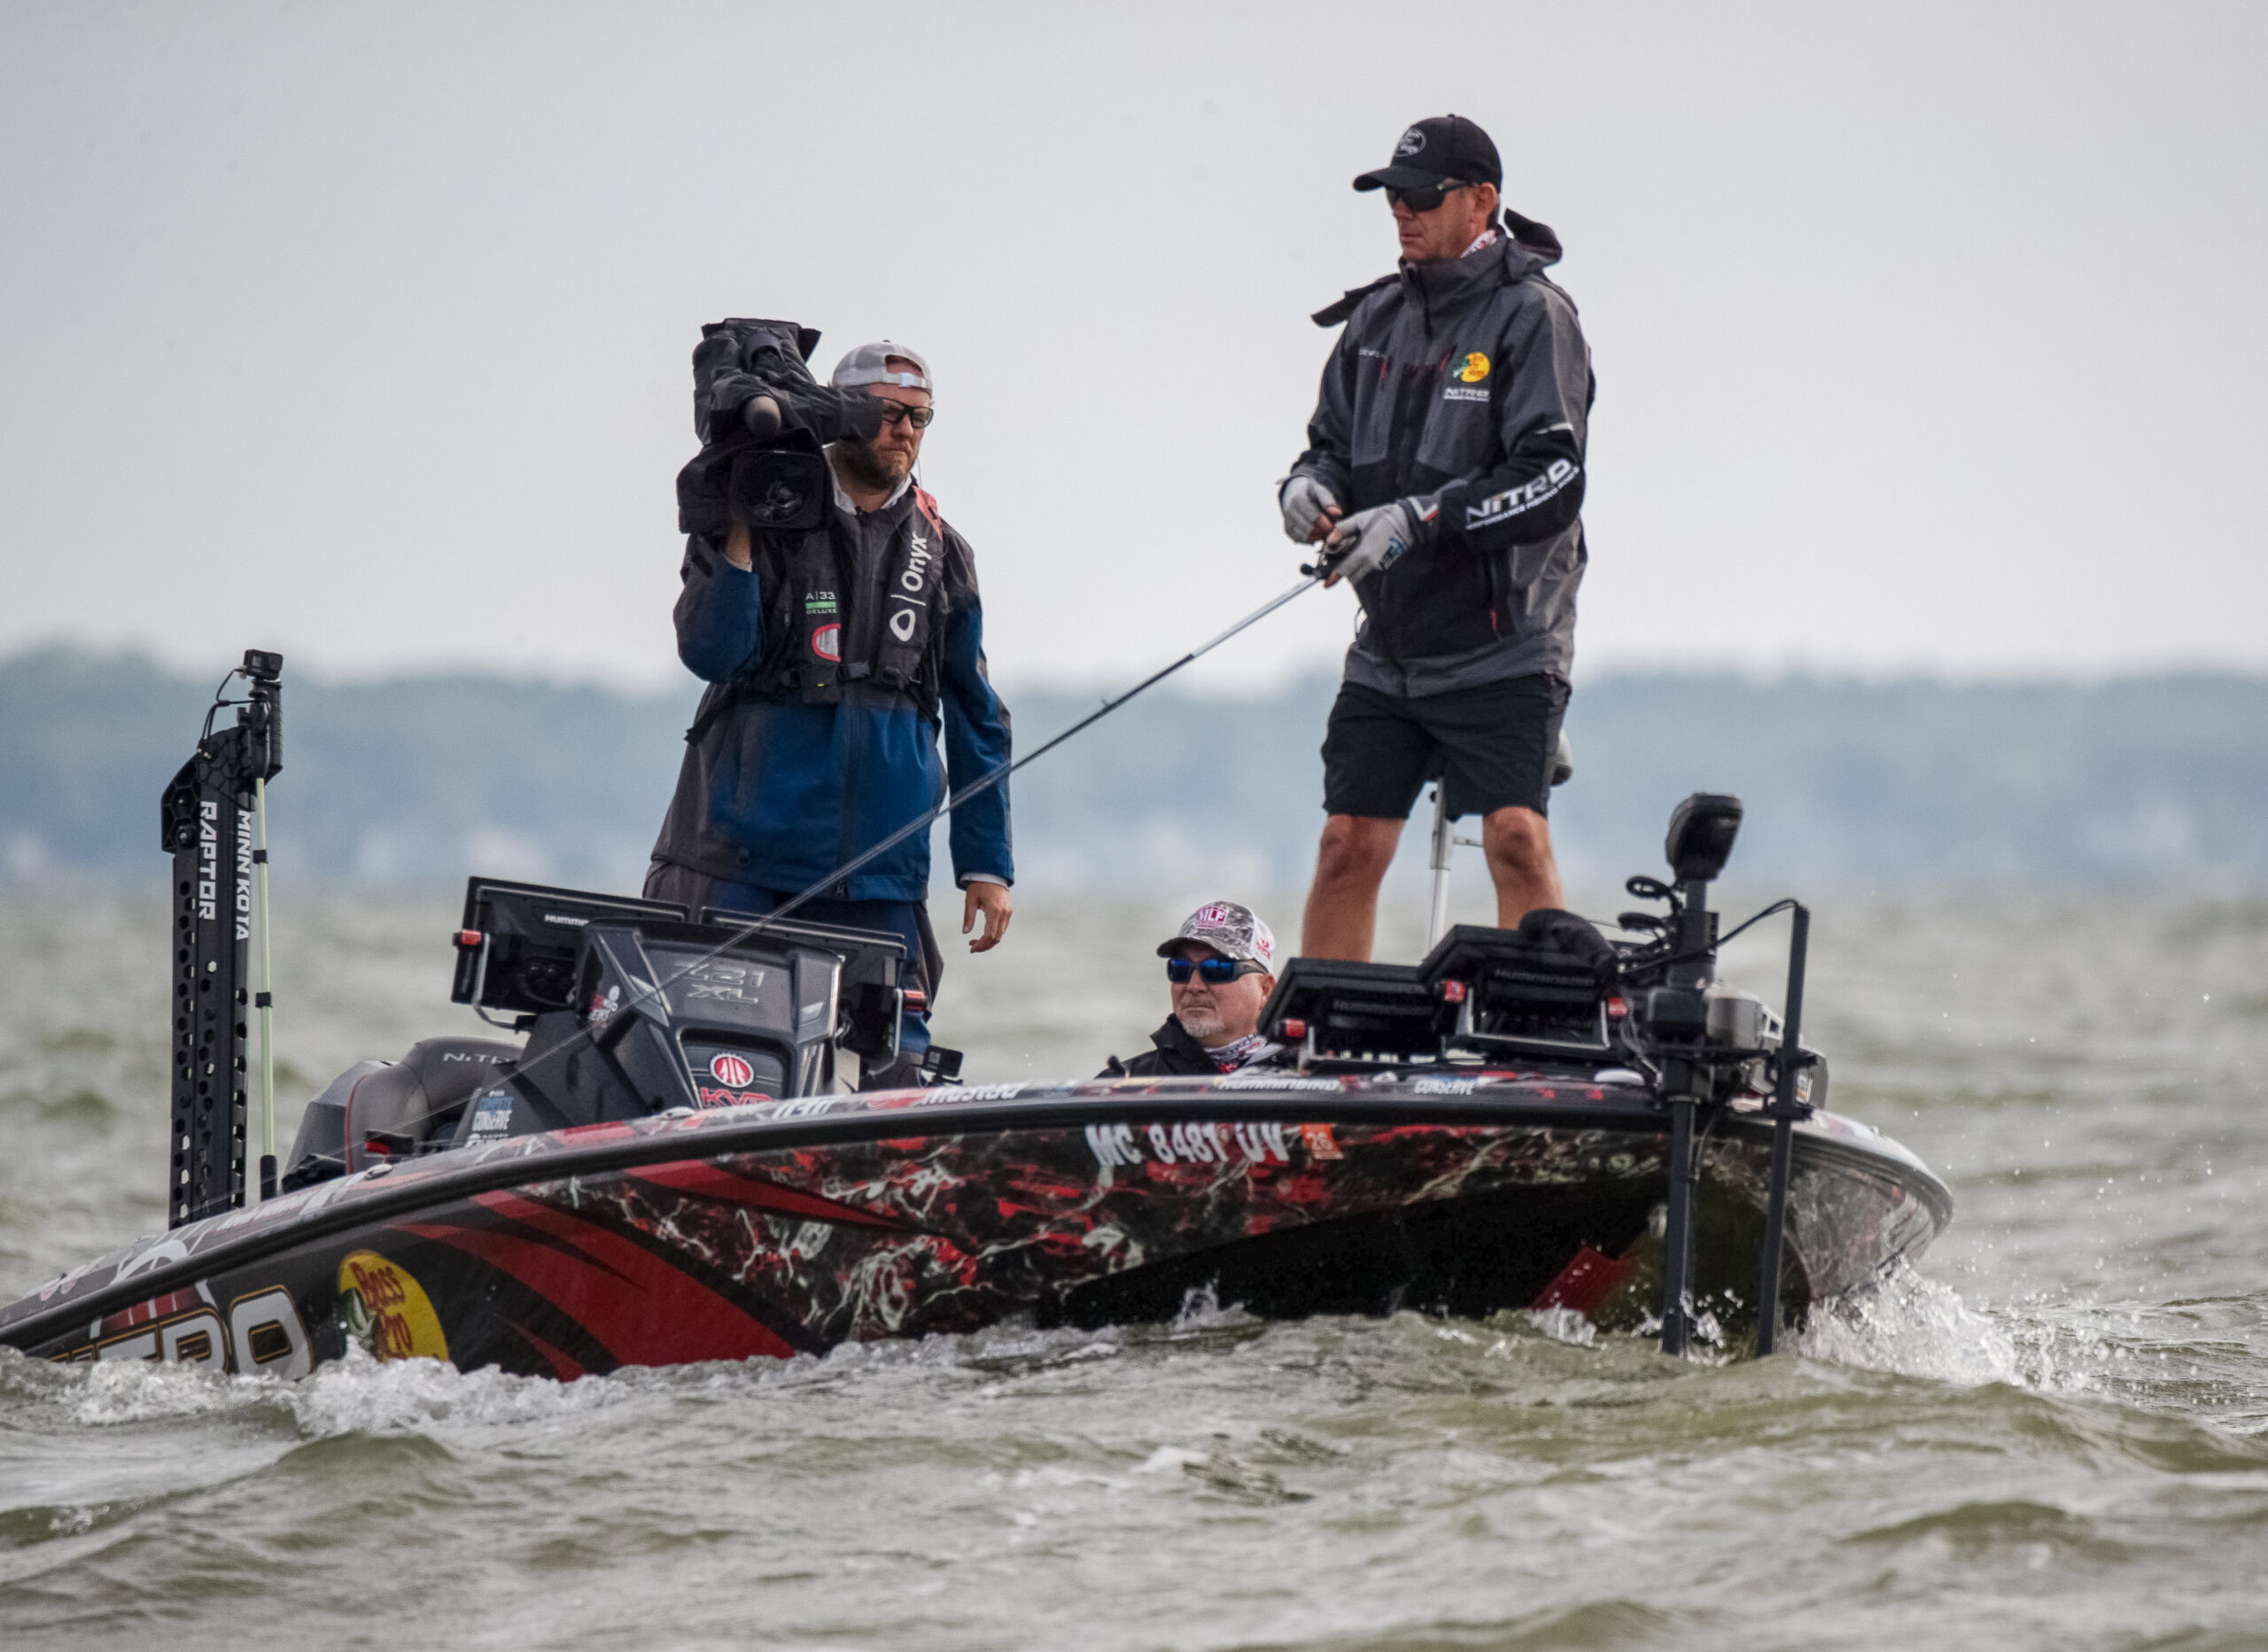 KEVIN VANDAM REDCREST will be a sentimental one for me Major League